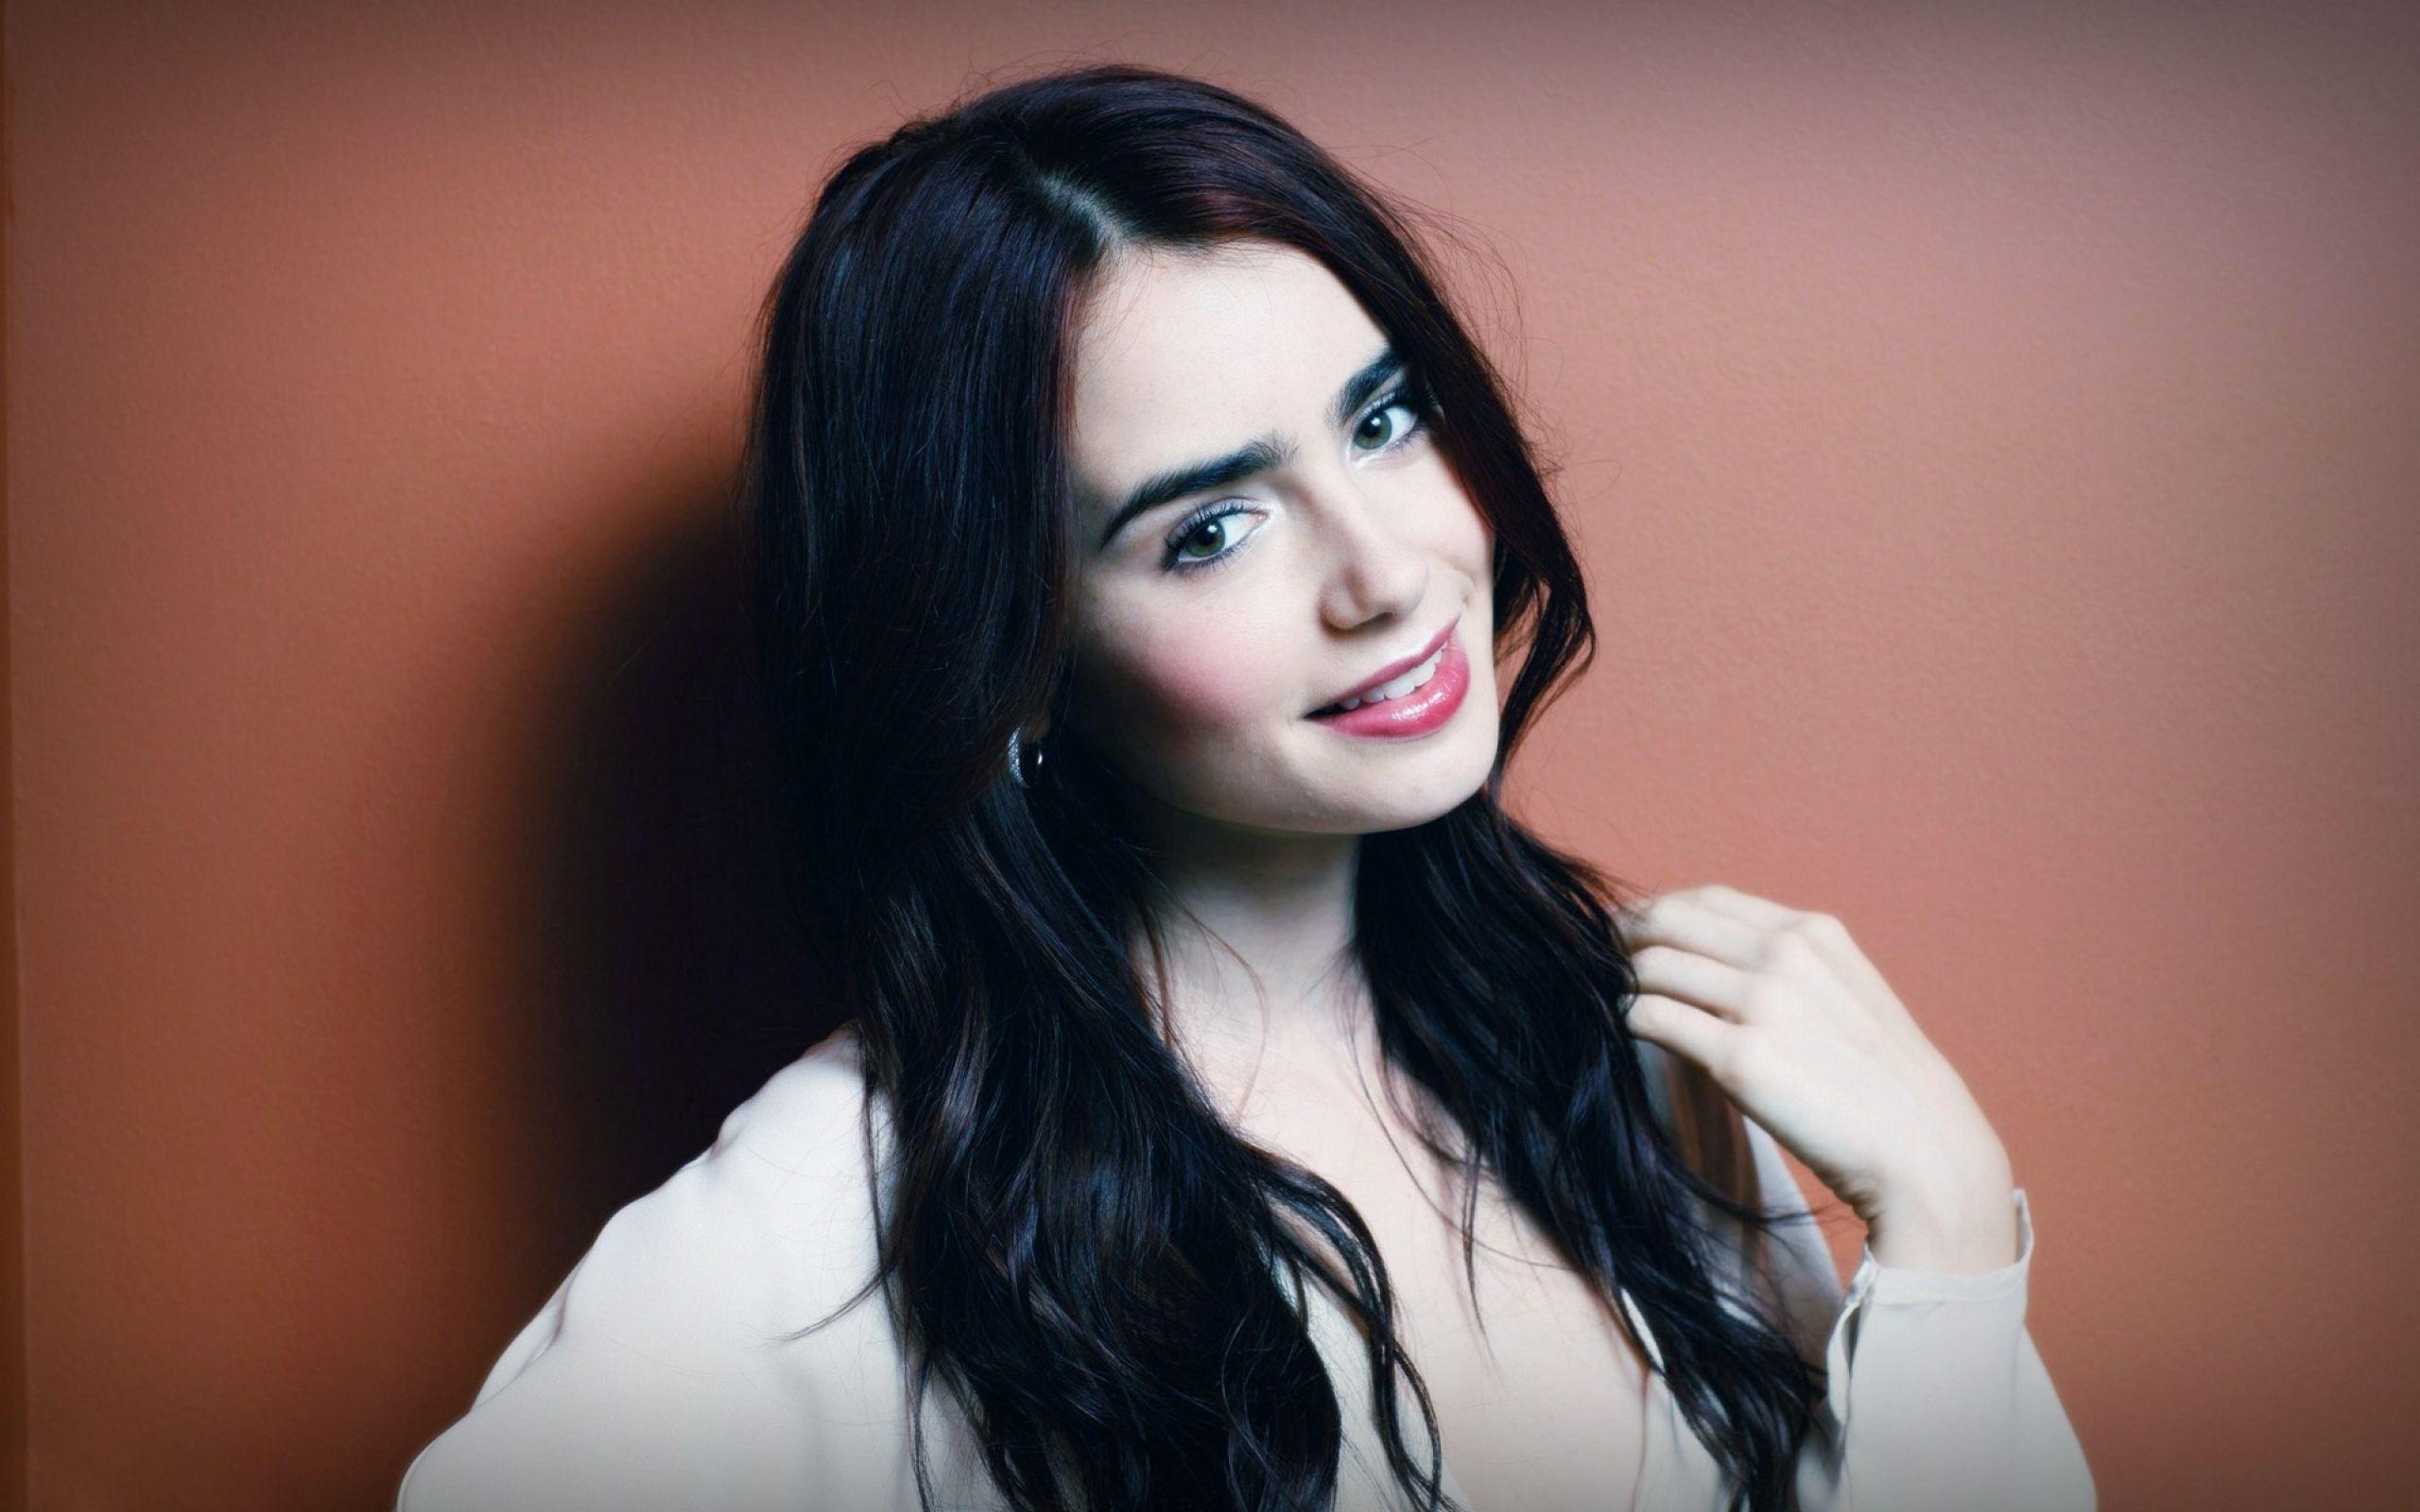 HD Background Lily Collins Actress Hollywood Smiling Face Wallpaper